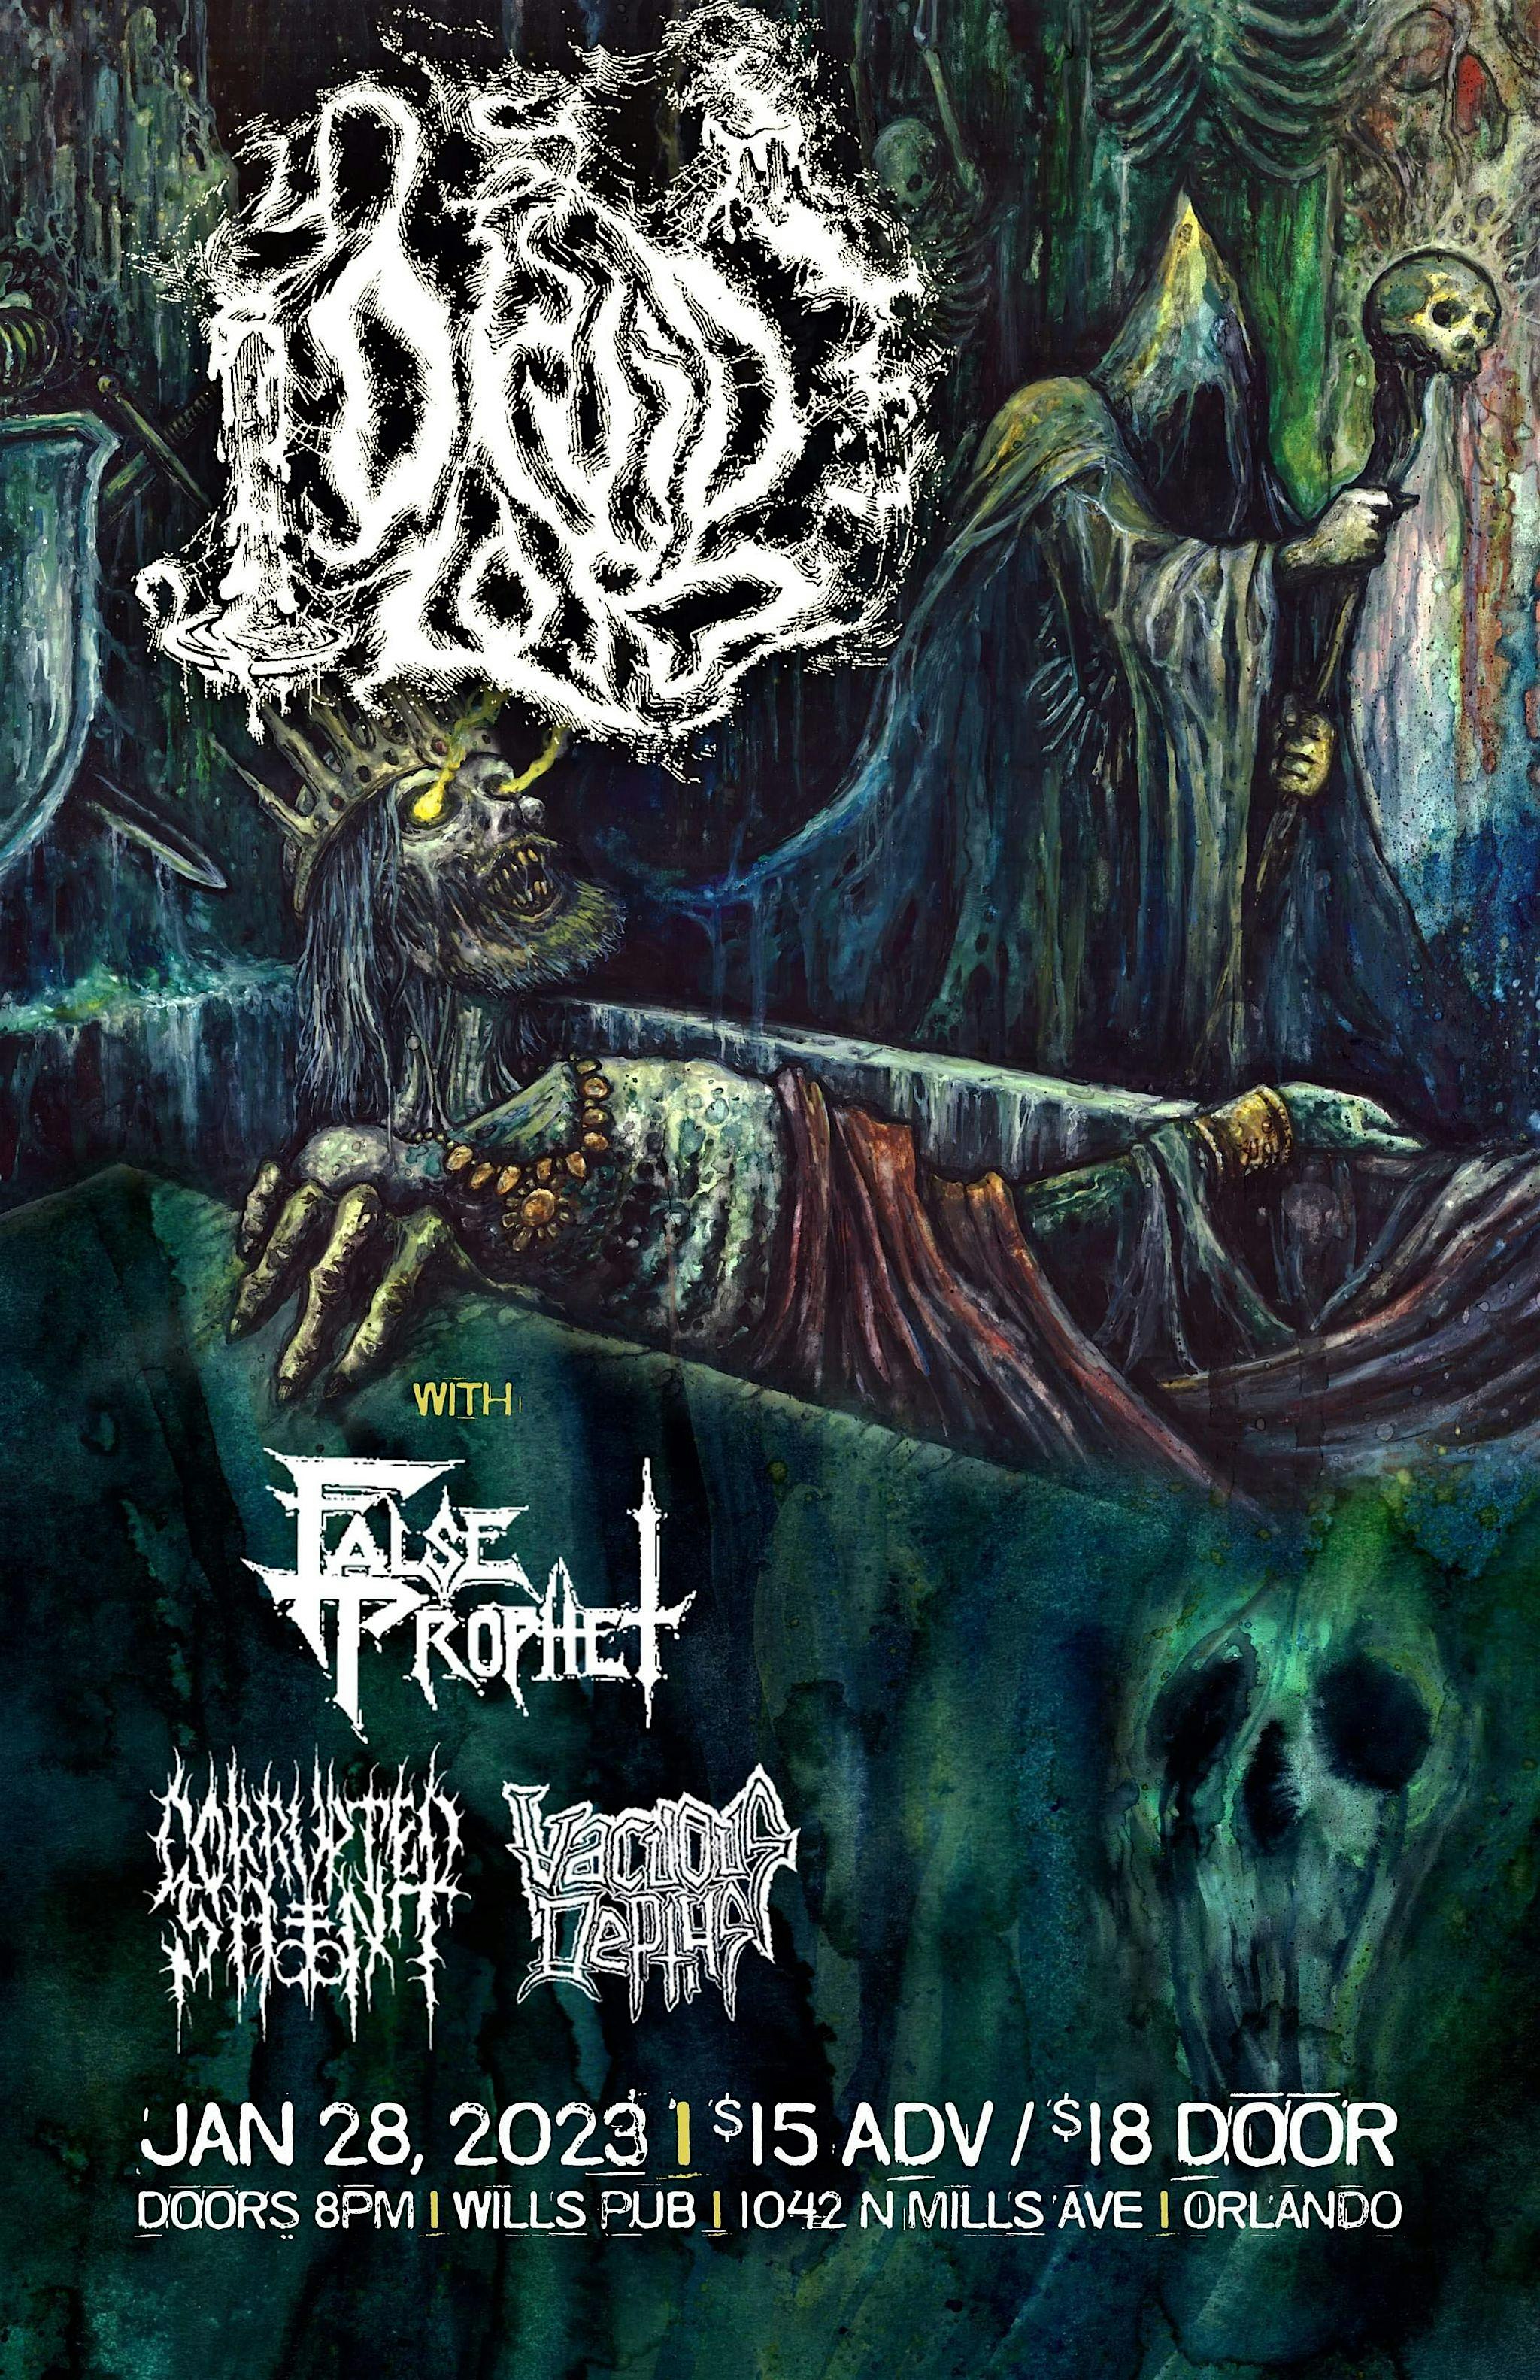 Druid Lord, False Prophet, Corrupted Saint, and Vacuous Depths in Orlando at Will's Pub